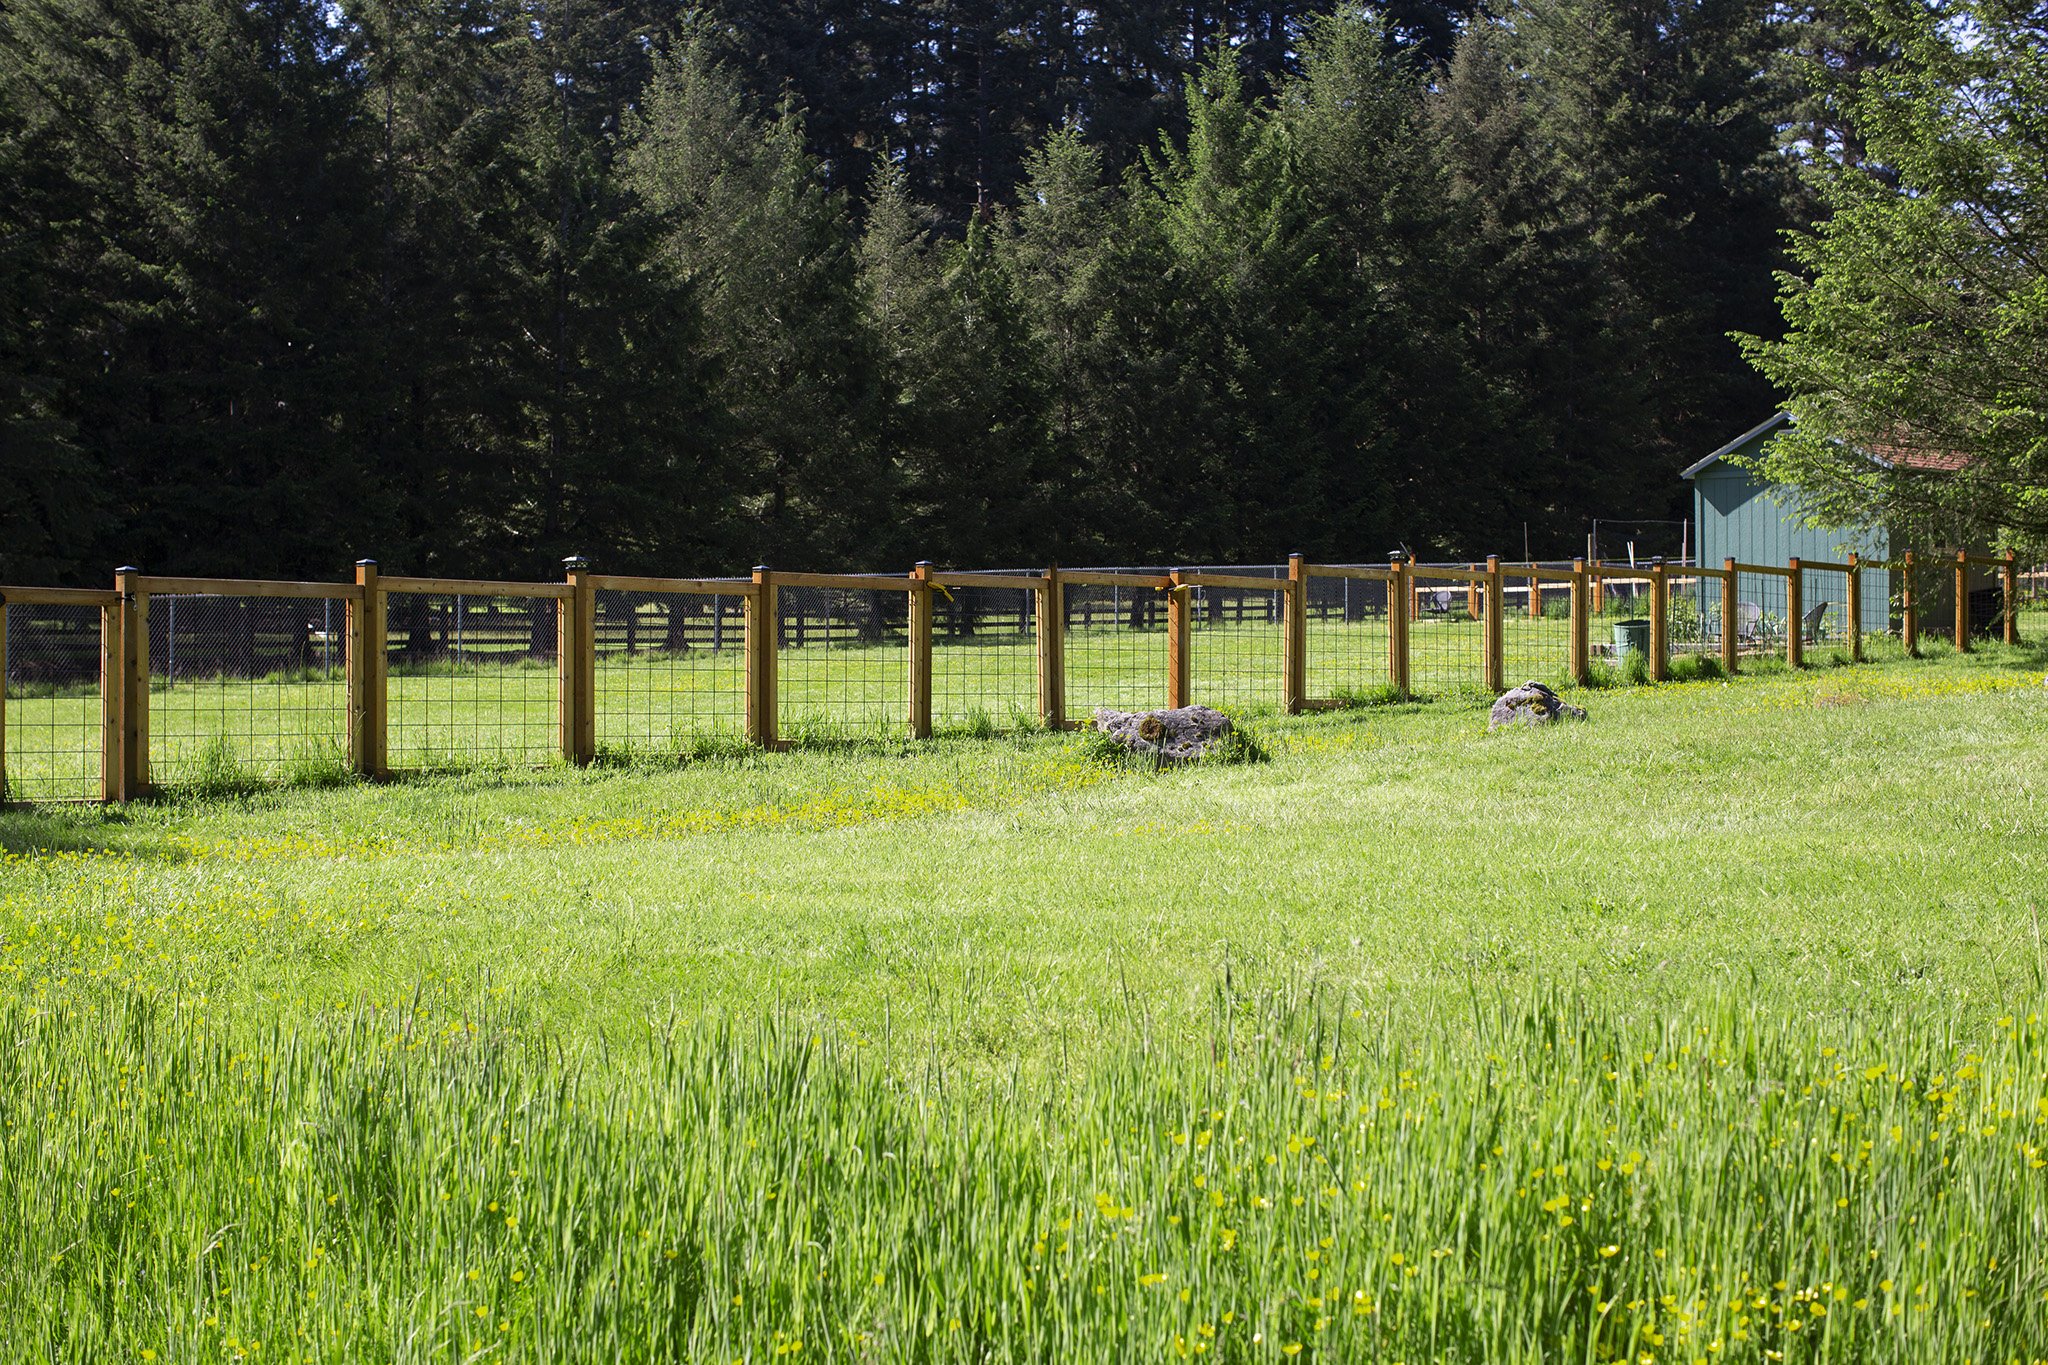 Types Of Fences  Eden Lawn Care and Snow Removal